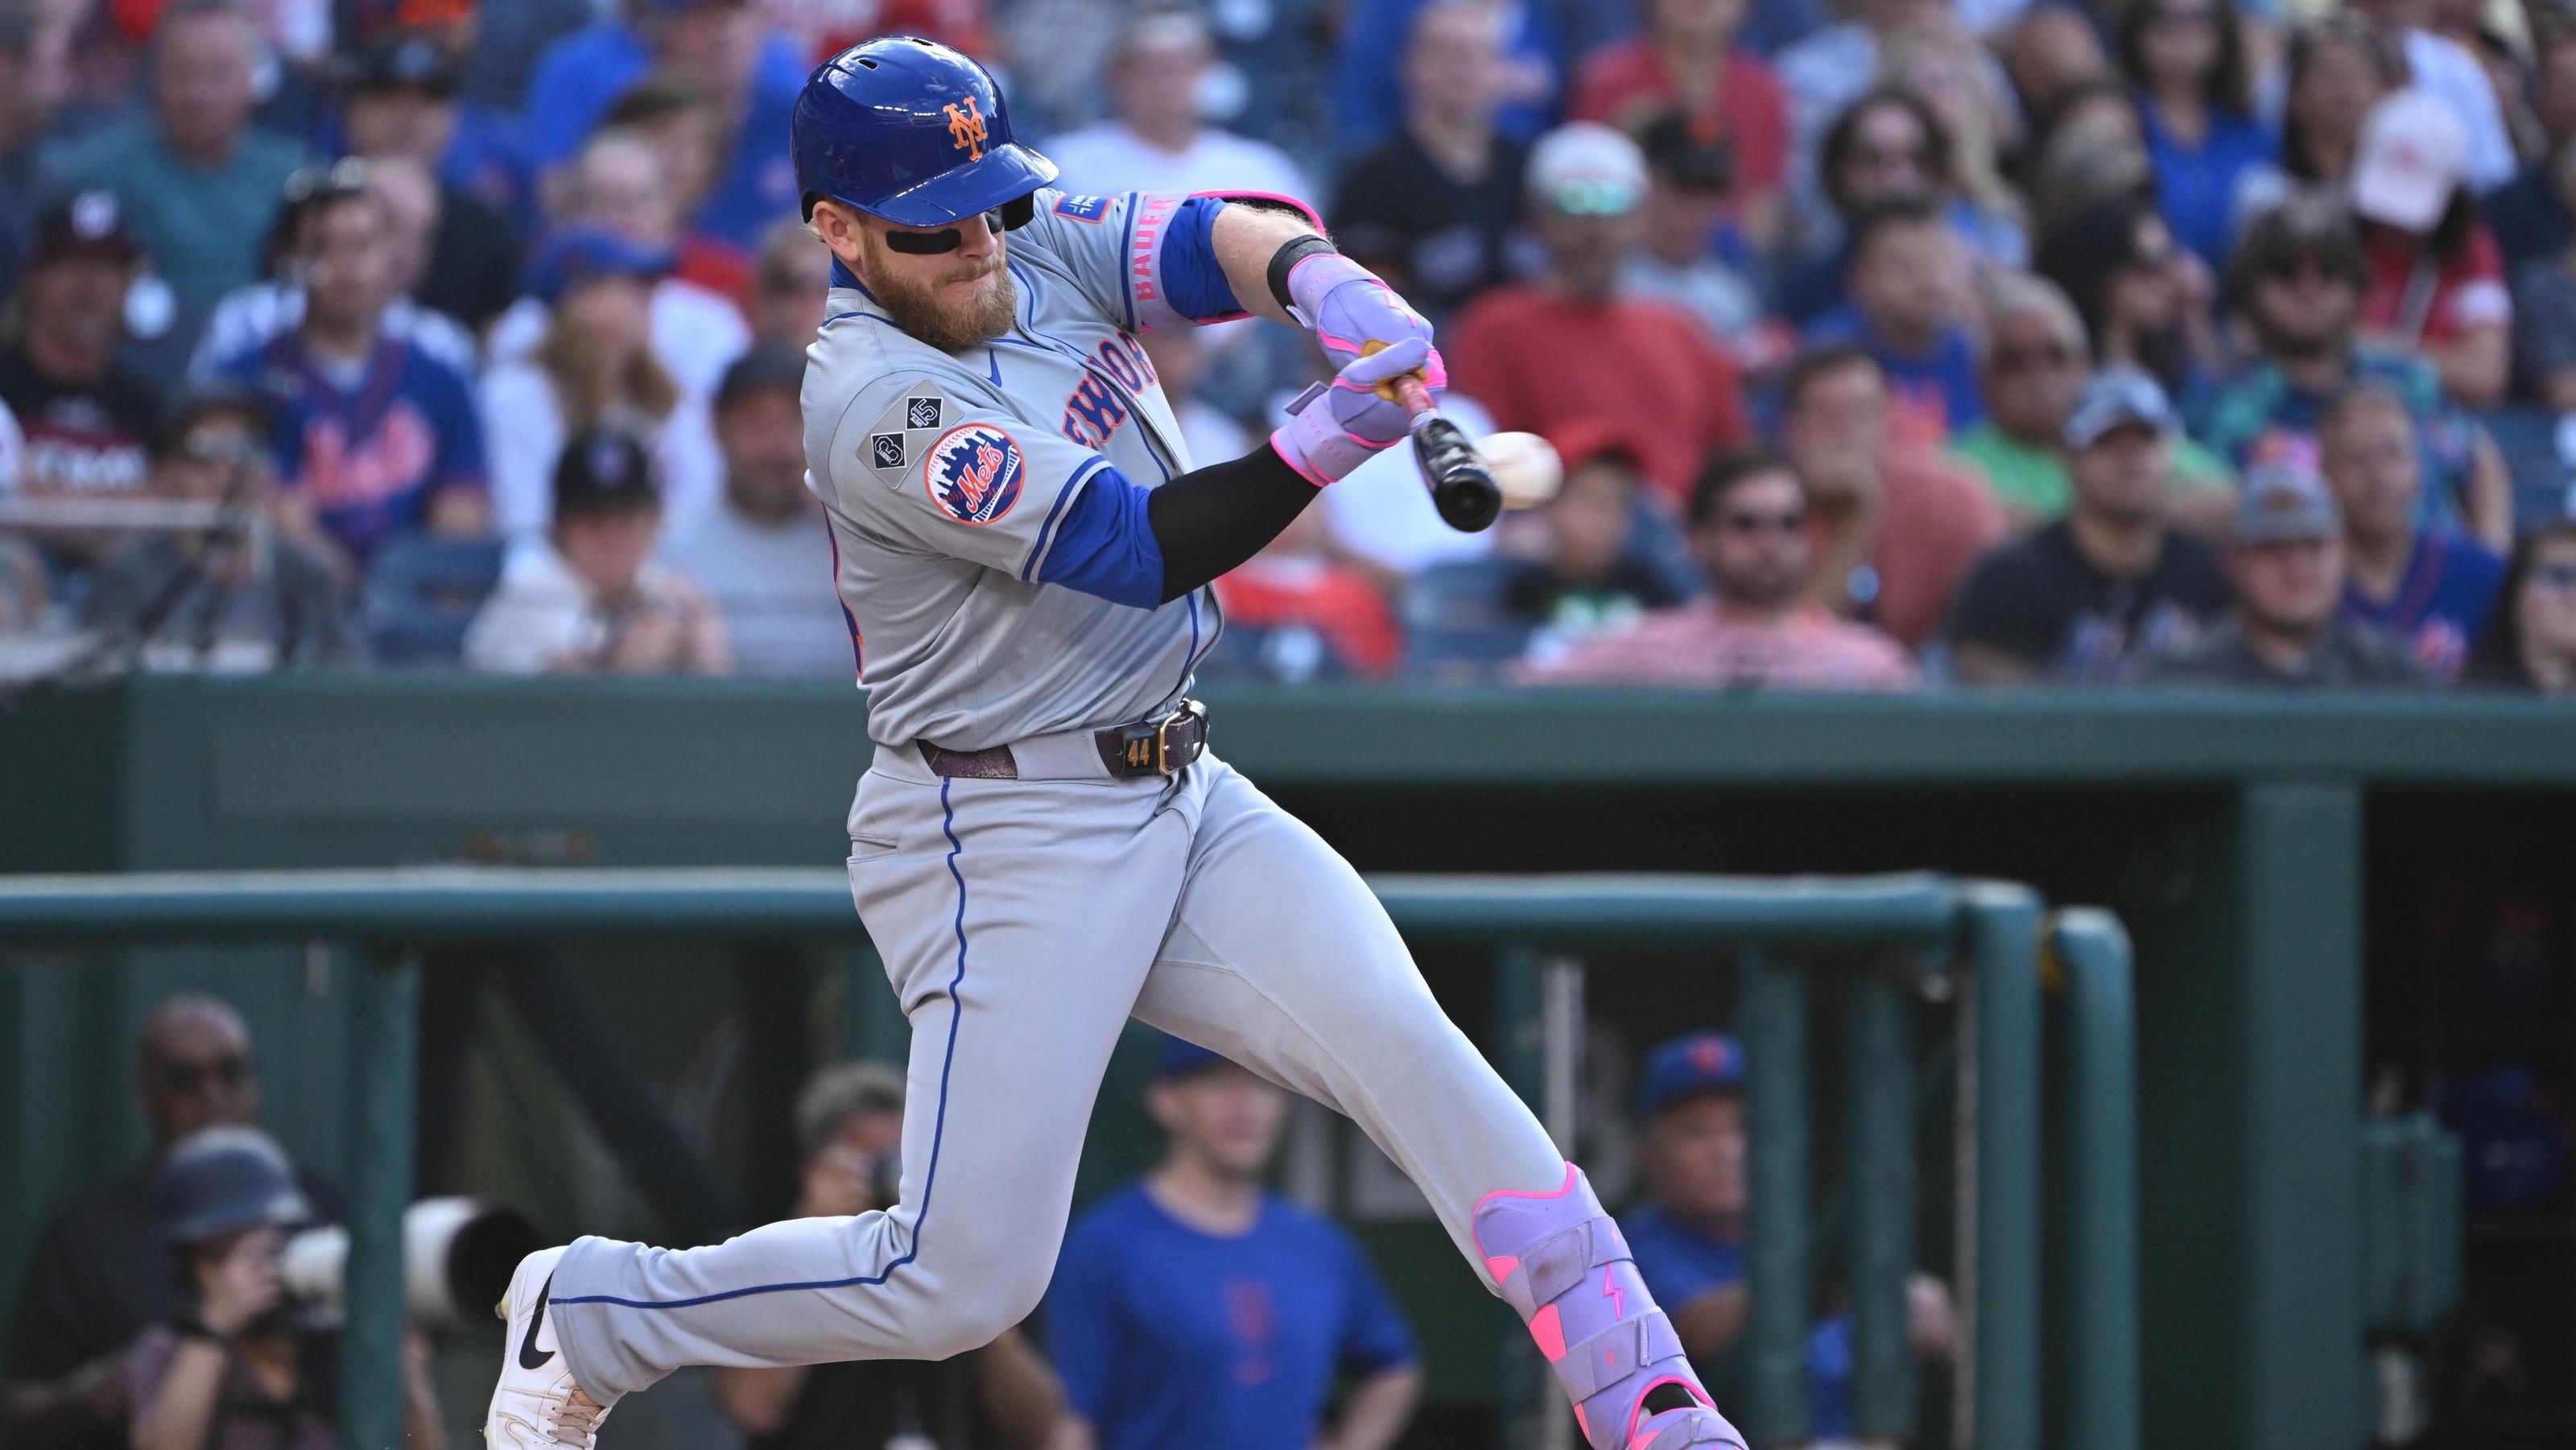 Mets score six runs in 10th inning, hang on to beat Nationals, 9-7, in extras